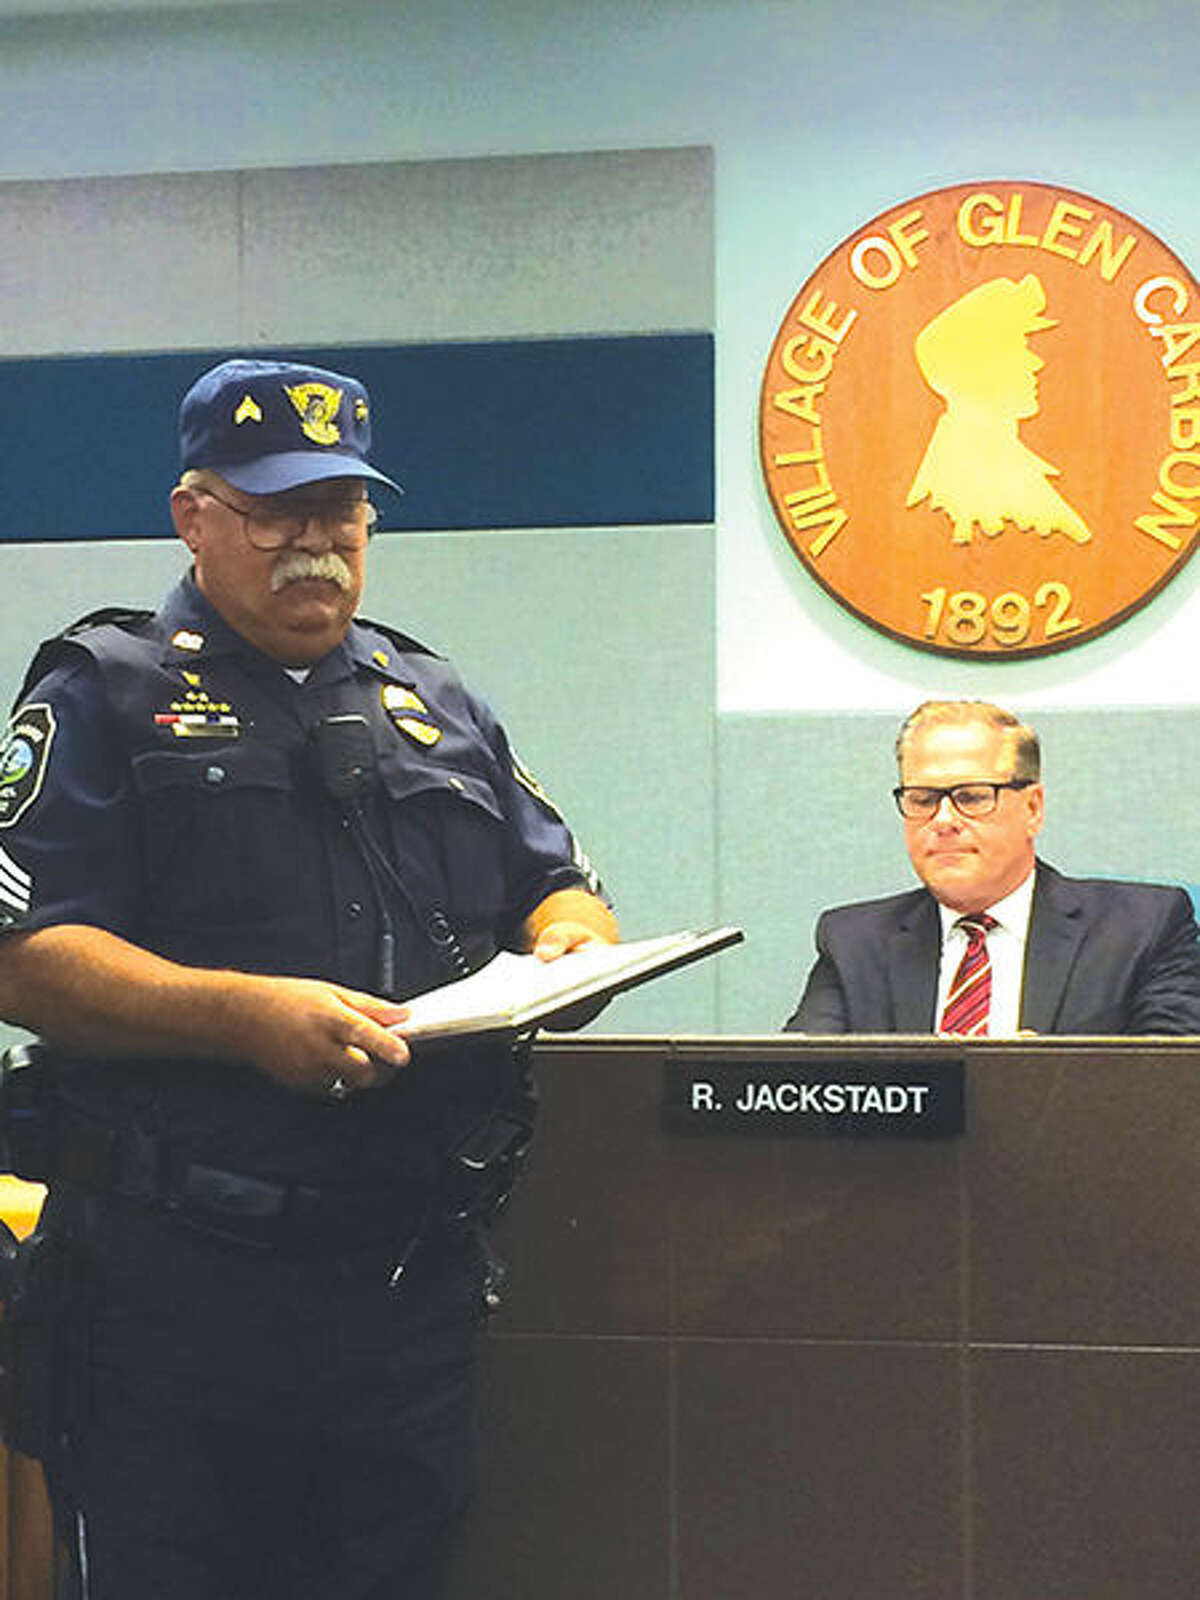 Glen Carbon Police Sgt. James Jones was recently honored for 40 years of service to the police department.